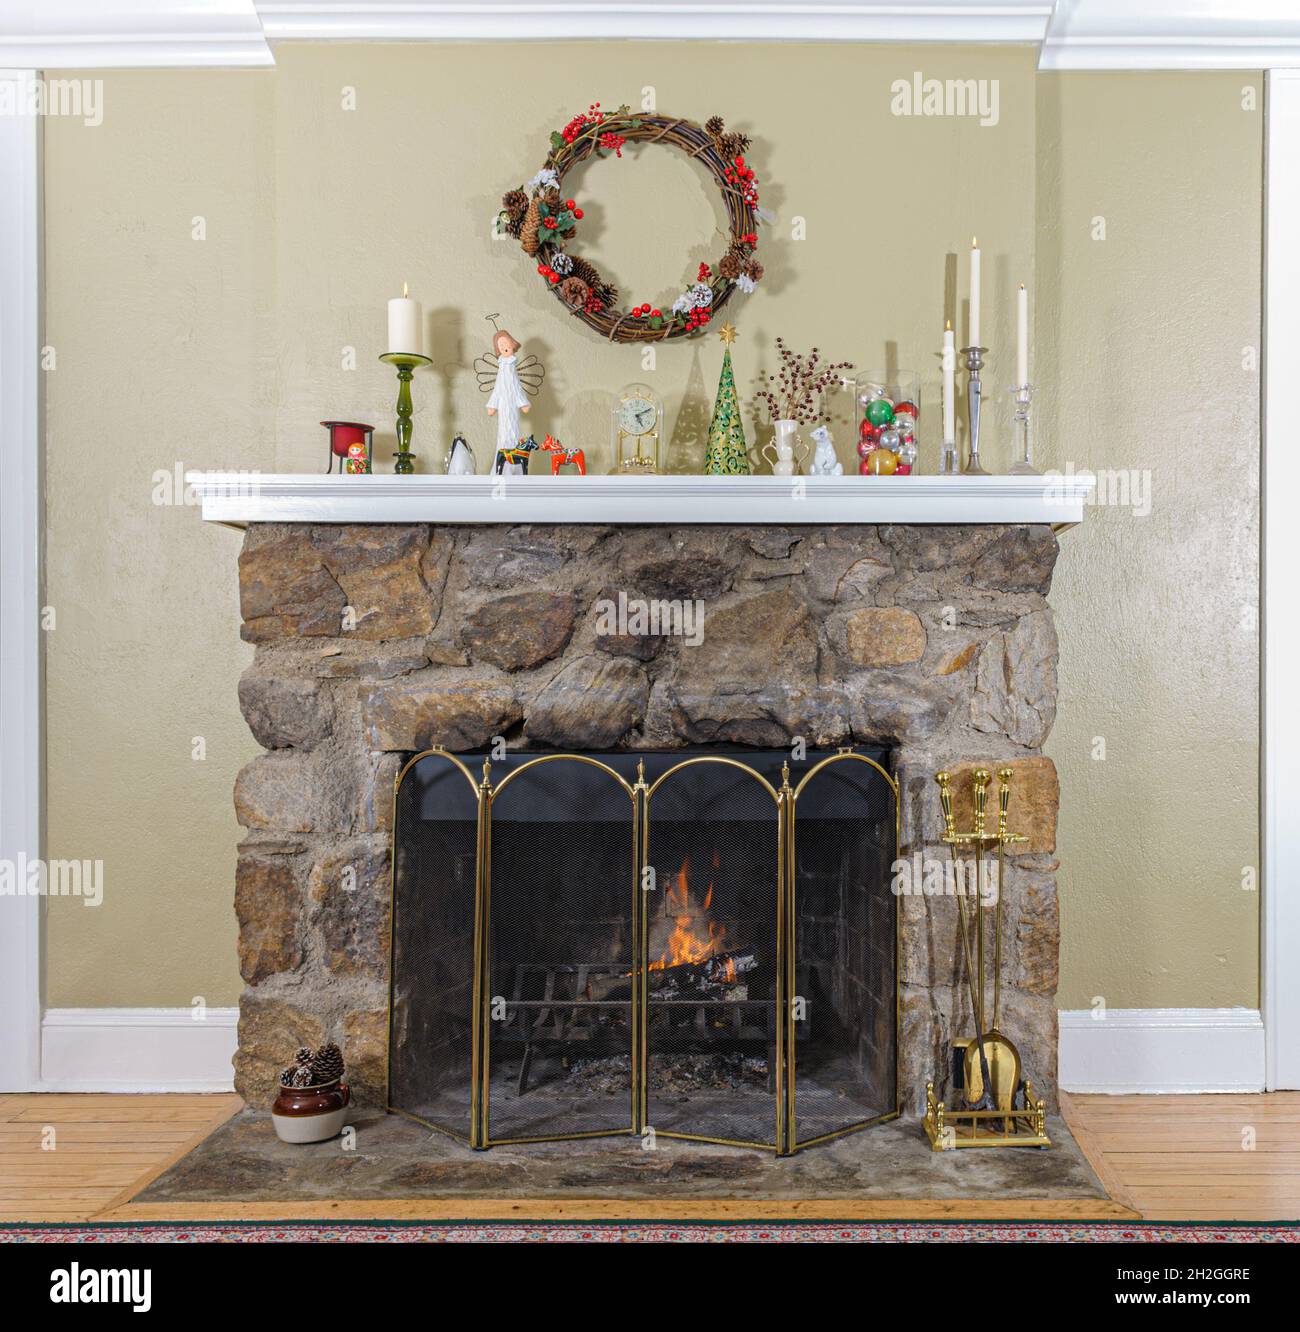 Rustic stone wood burning fireplace with a cosy fire and mantlepiece with Christmas decorations and a holiday wreath. Stock Photo